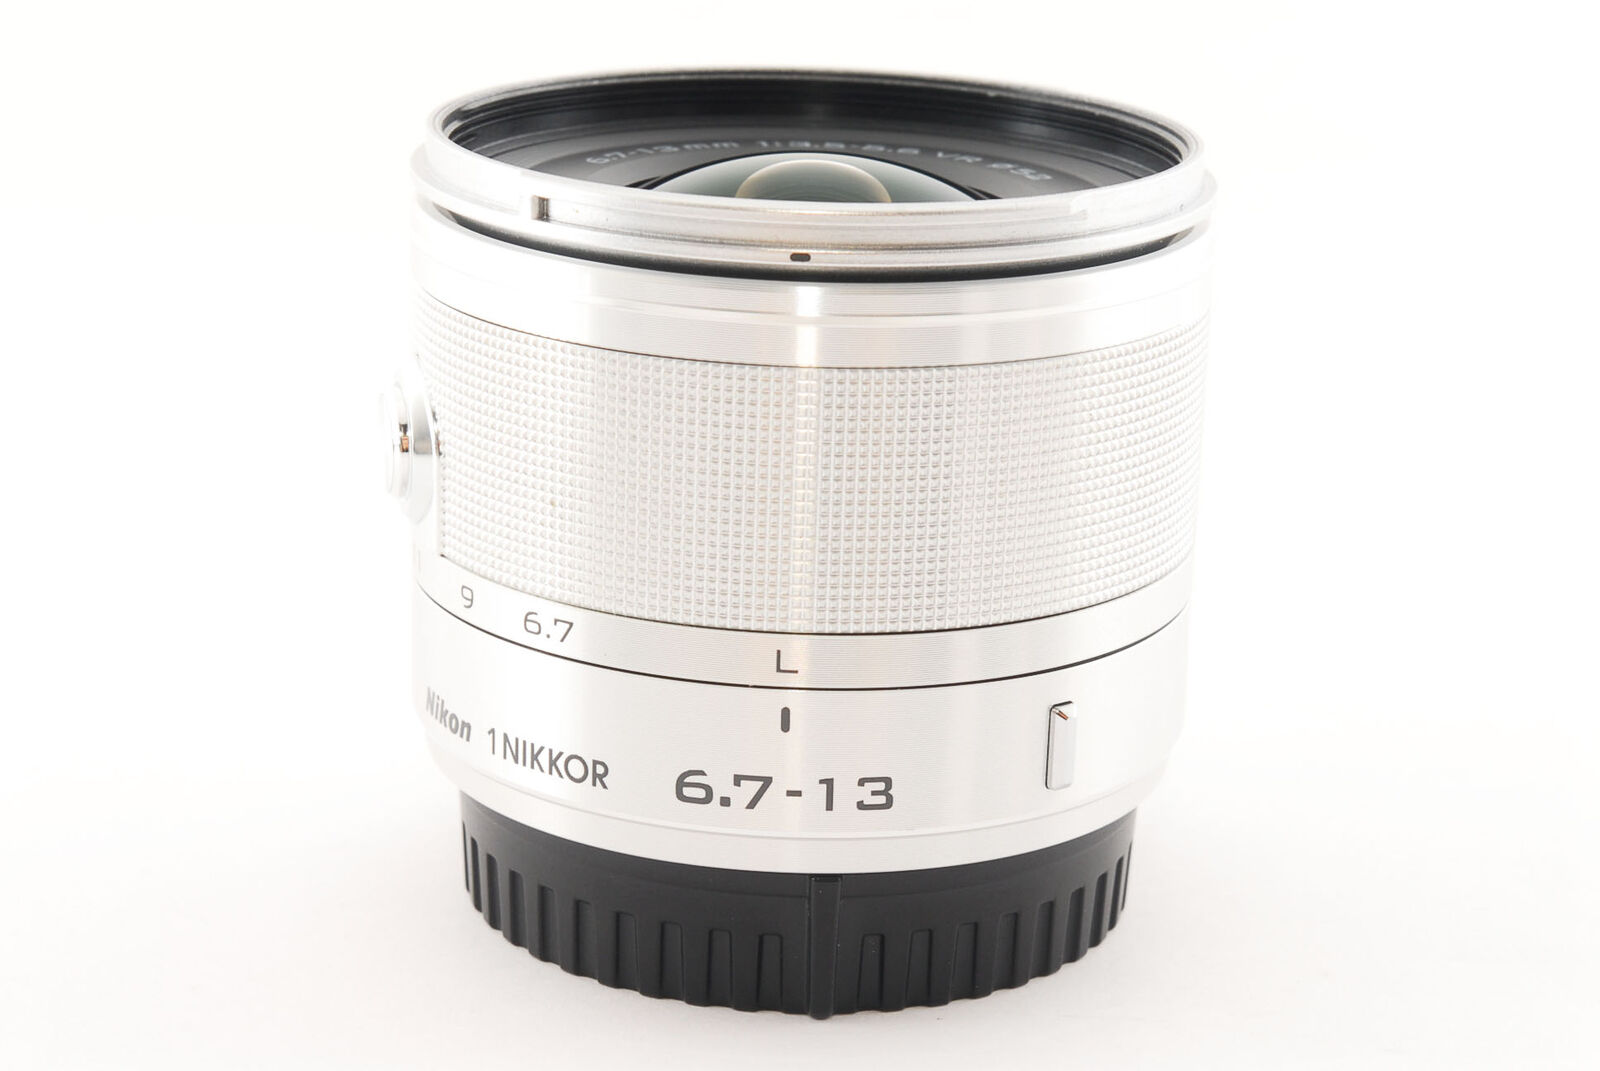 Nikon 1 NIKKOR 6.7-13mm f/3.5-5.6 AS VR IF ED Lens (Silver) for 